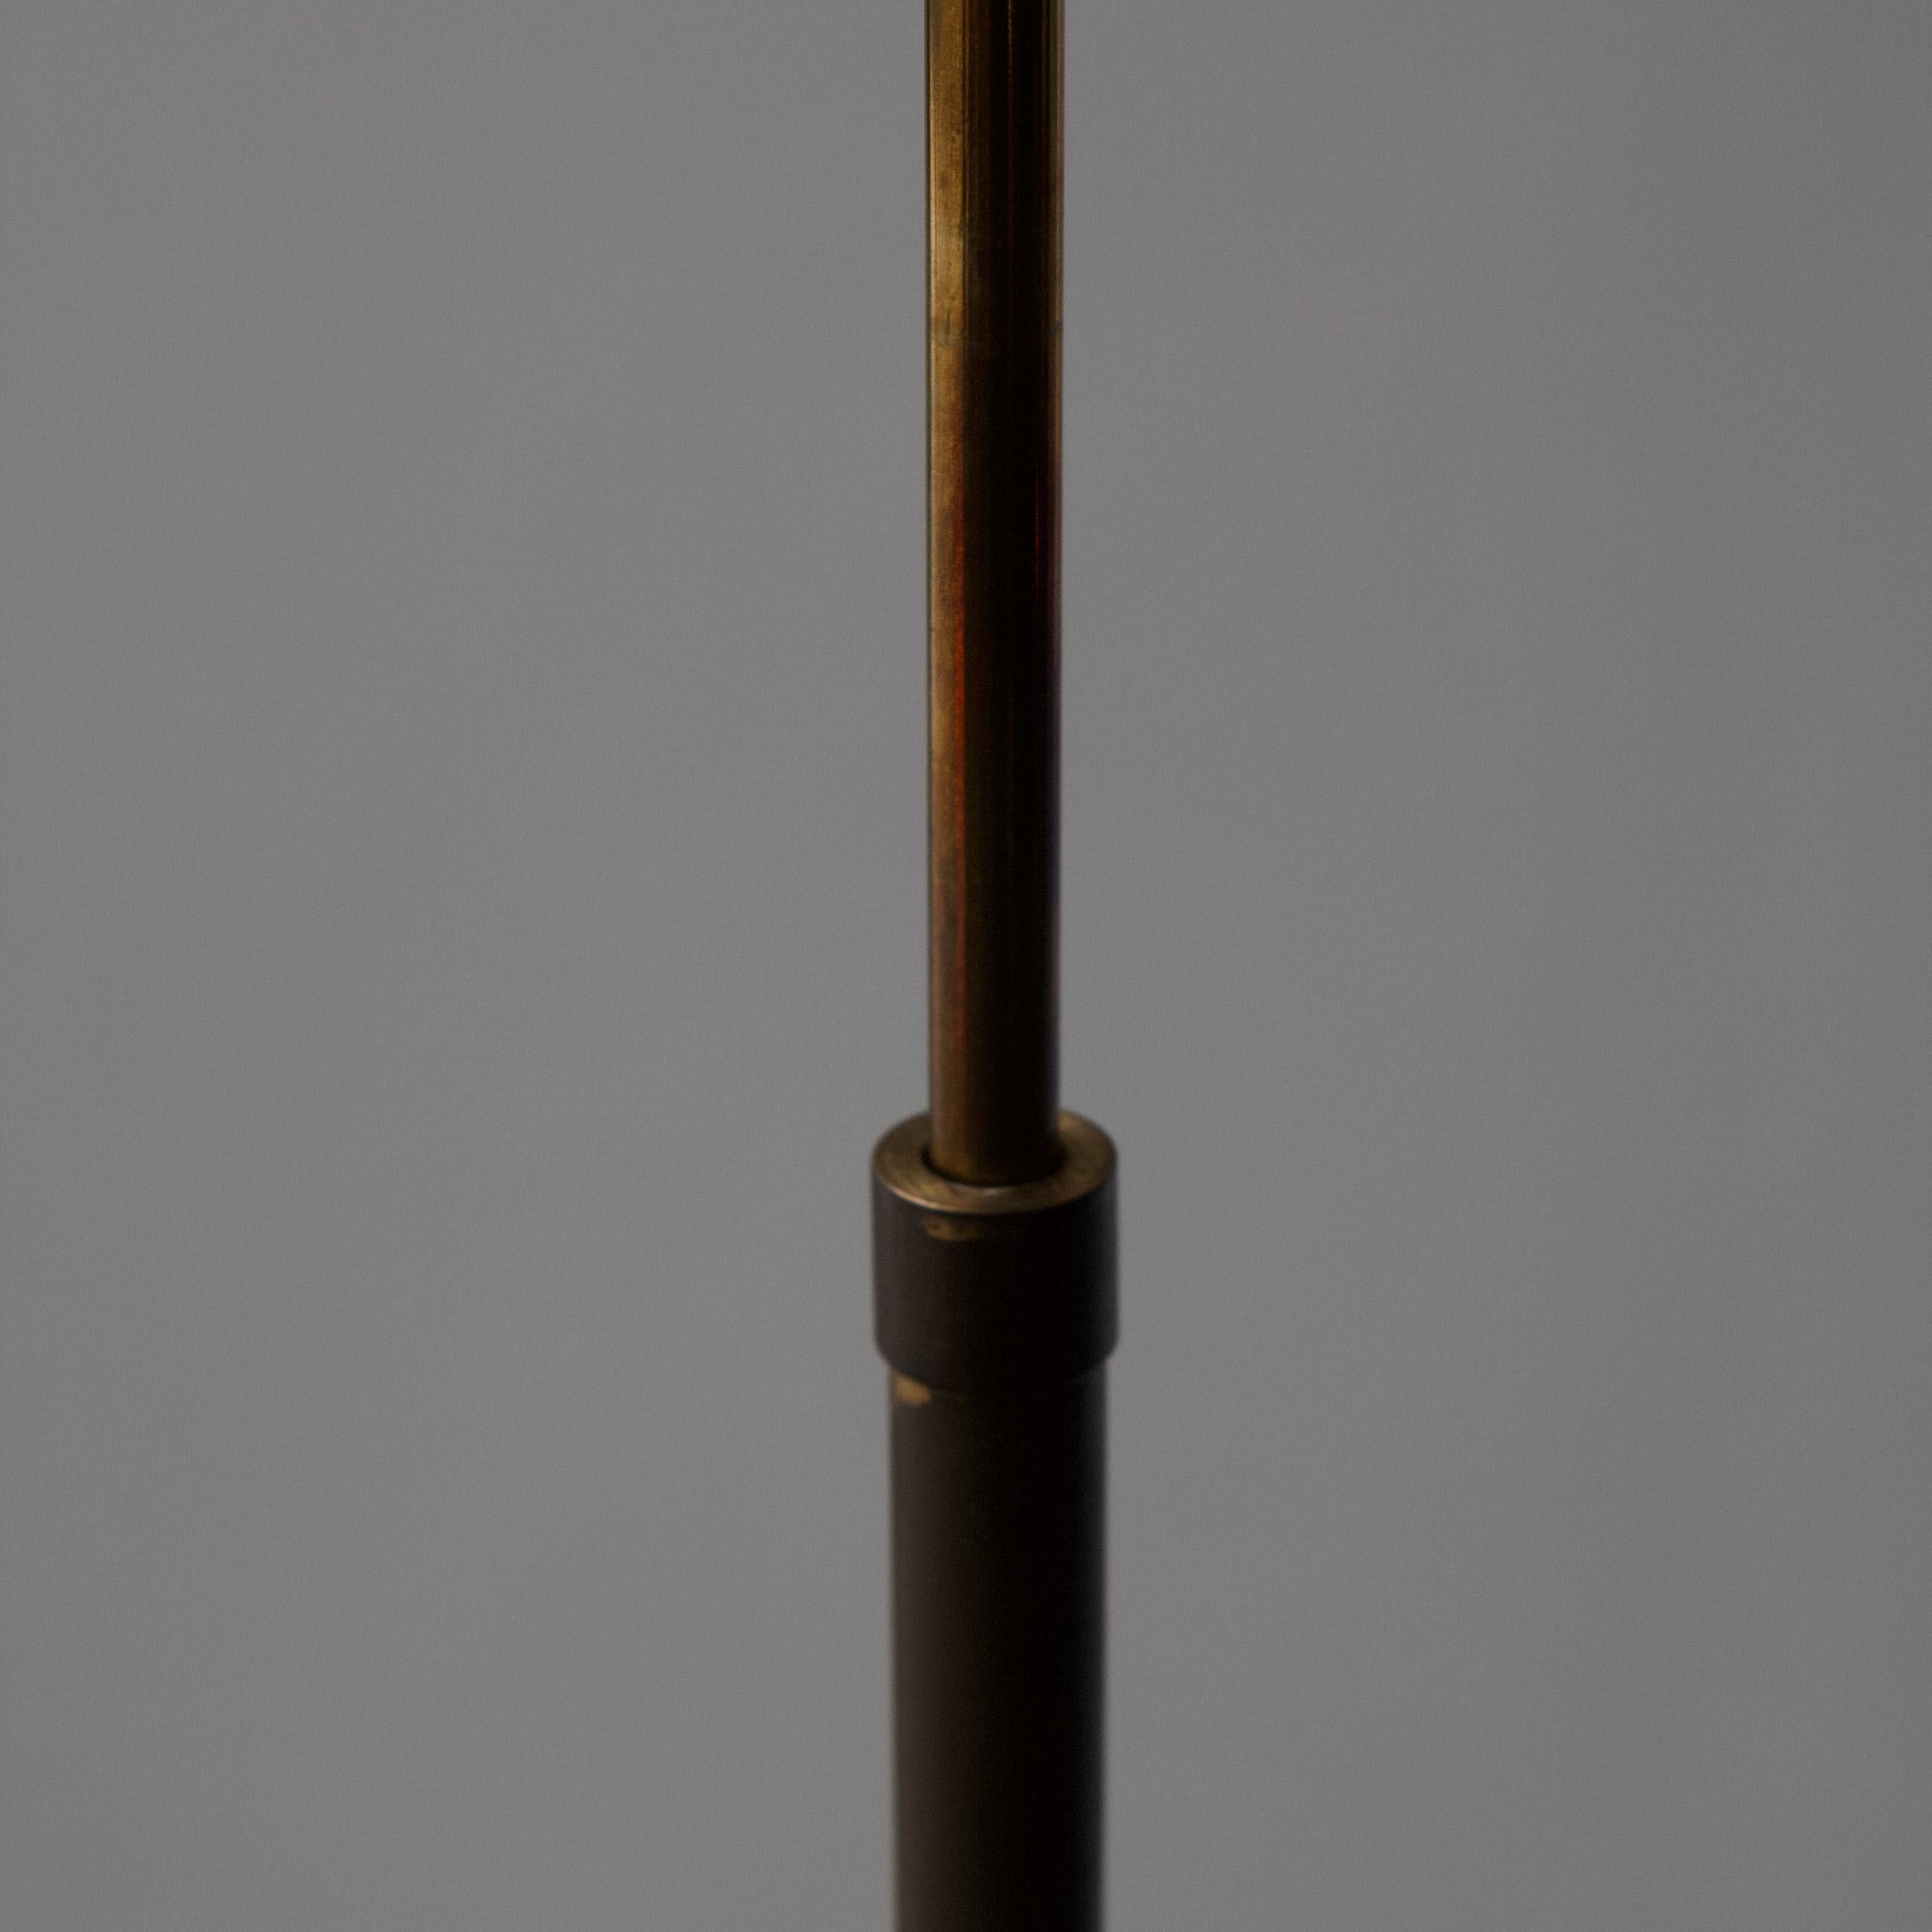 A slim brass floor light with telescopic extension, allowing the height to be lowered or raised. 

The base, stem and distinctive curved bulb holder of this lamp are richly patinated. The brass appears lighter at the centre as a result of the